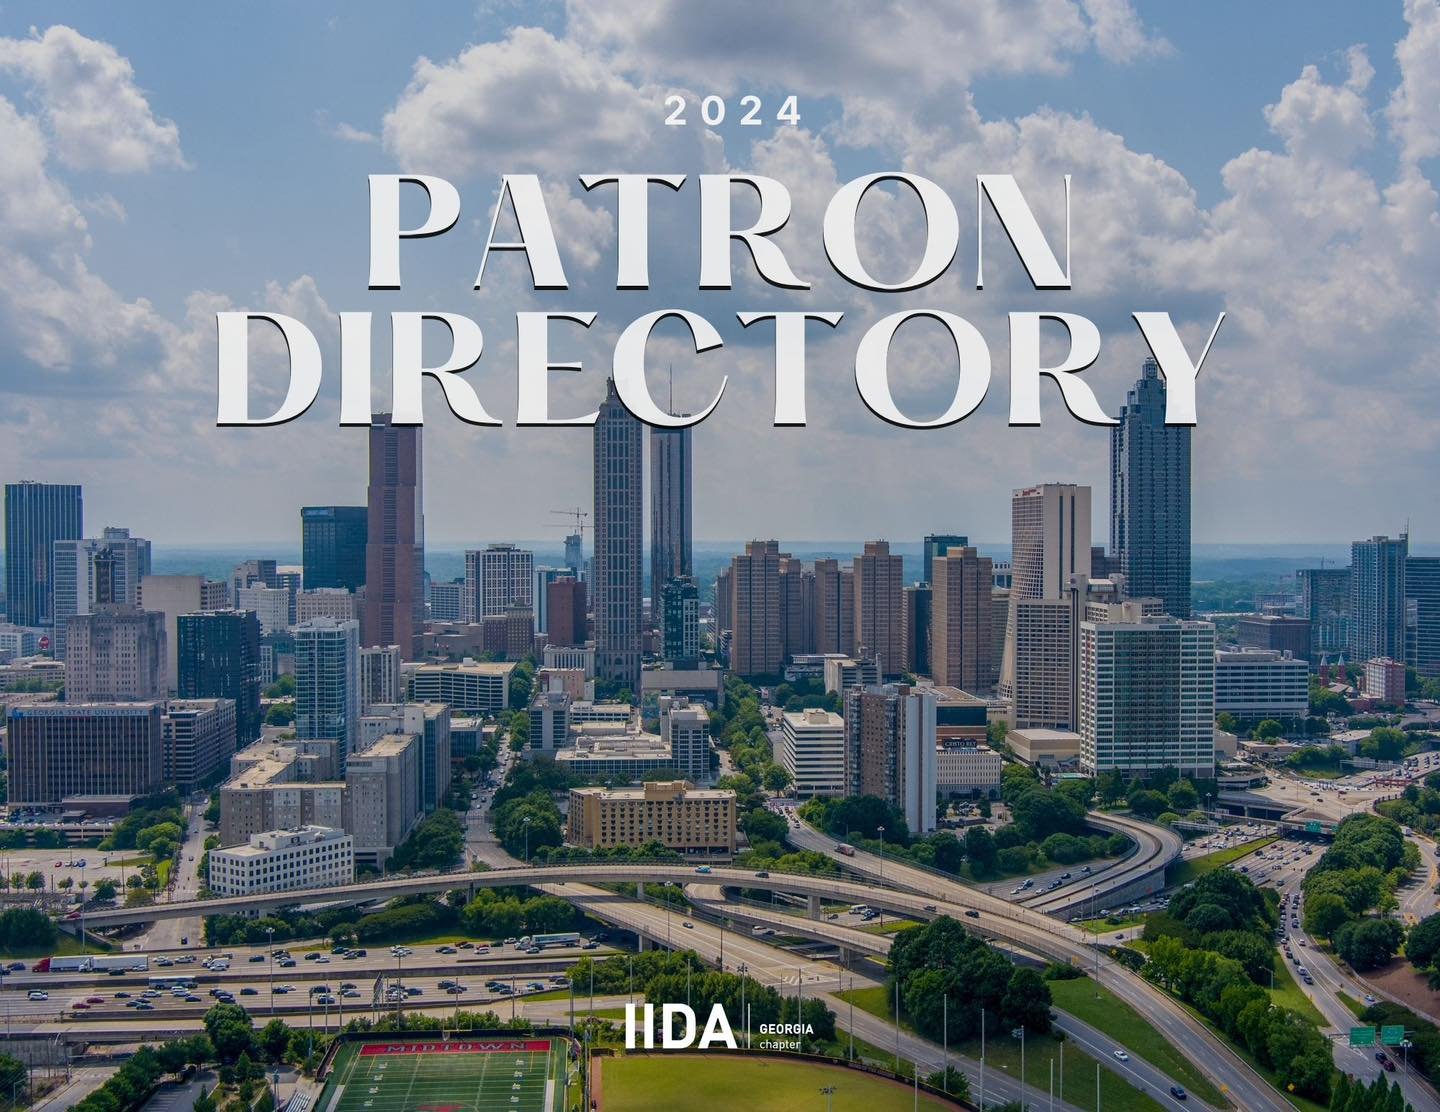 Wondering how best to get in touch with our Patrons? Click the link in our bio to access the 2024 Patron Directory!!